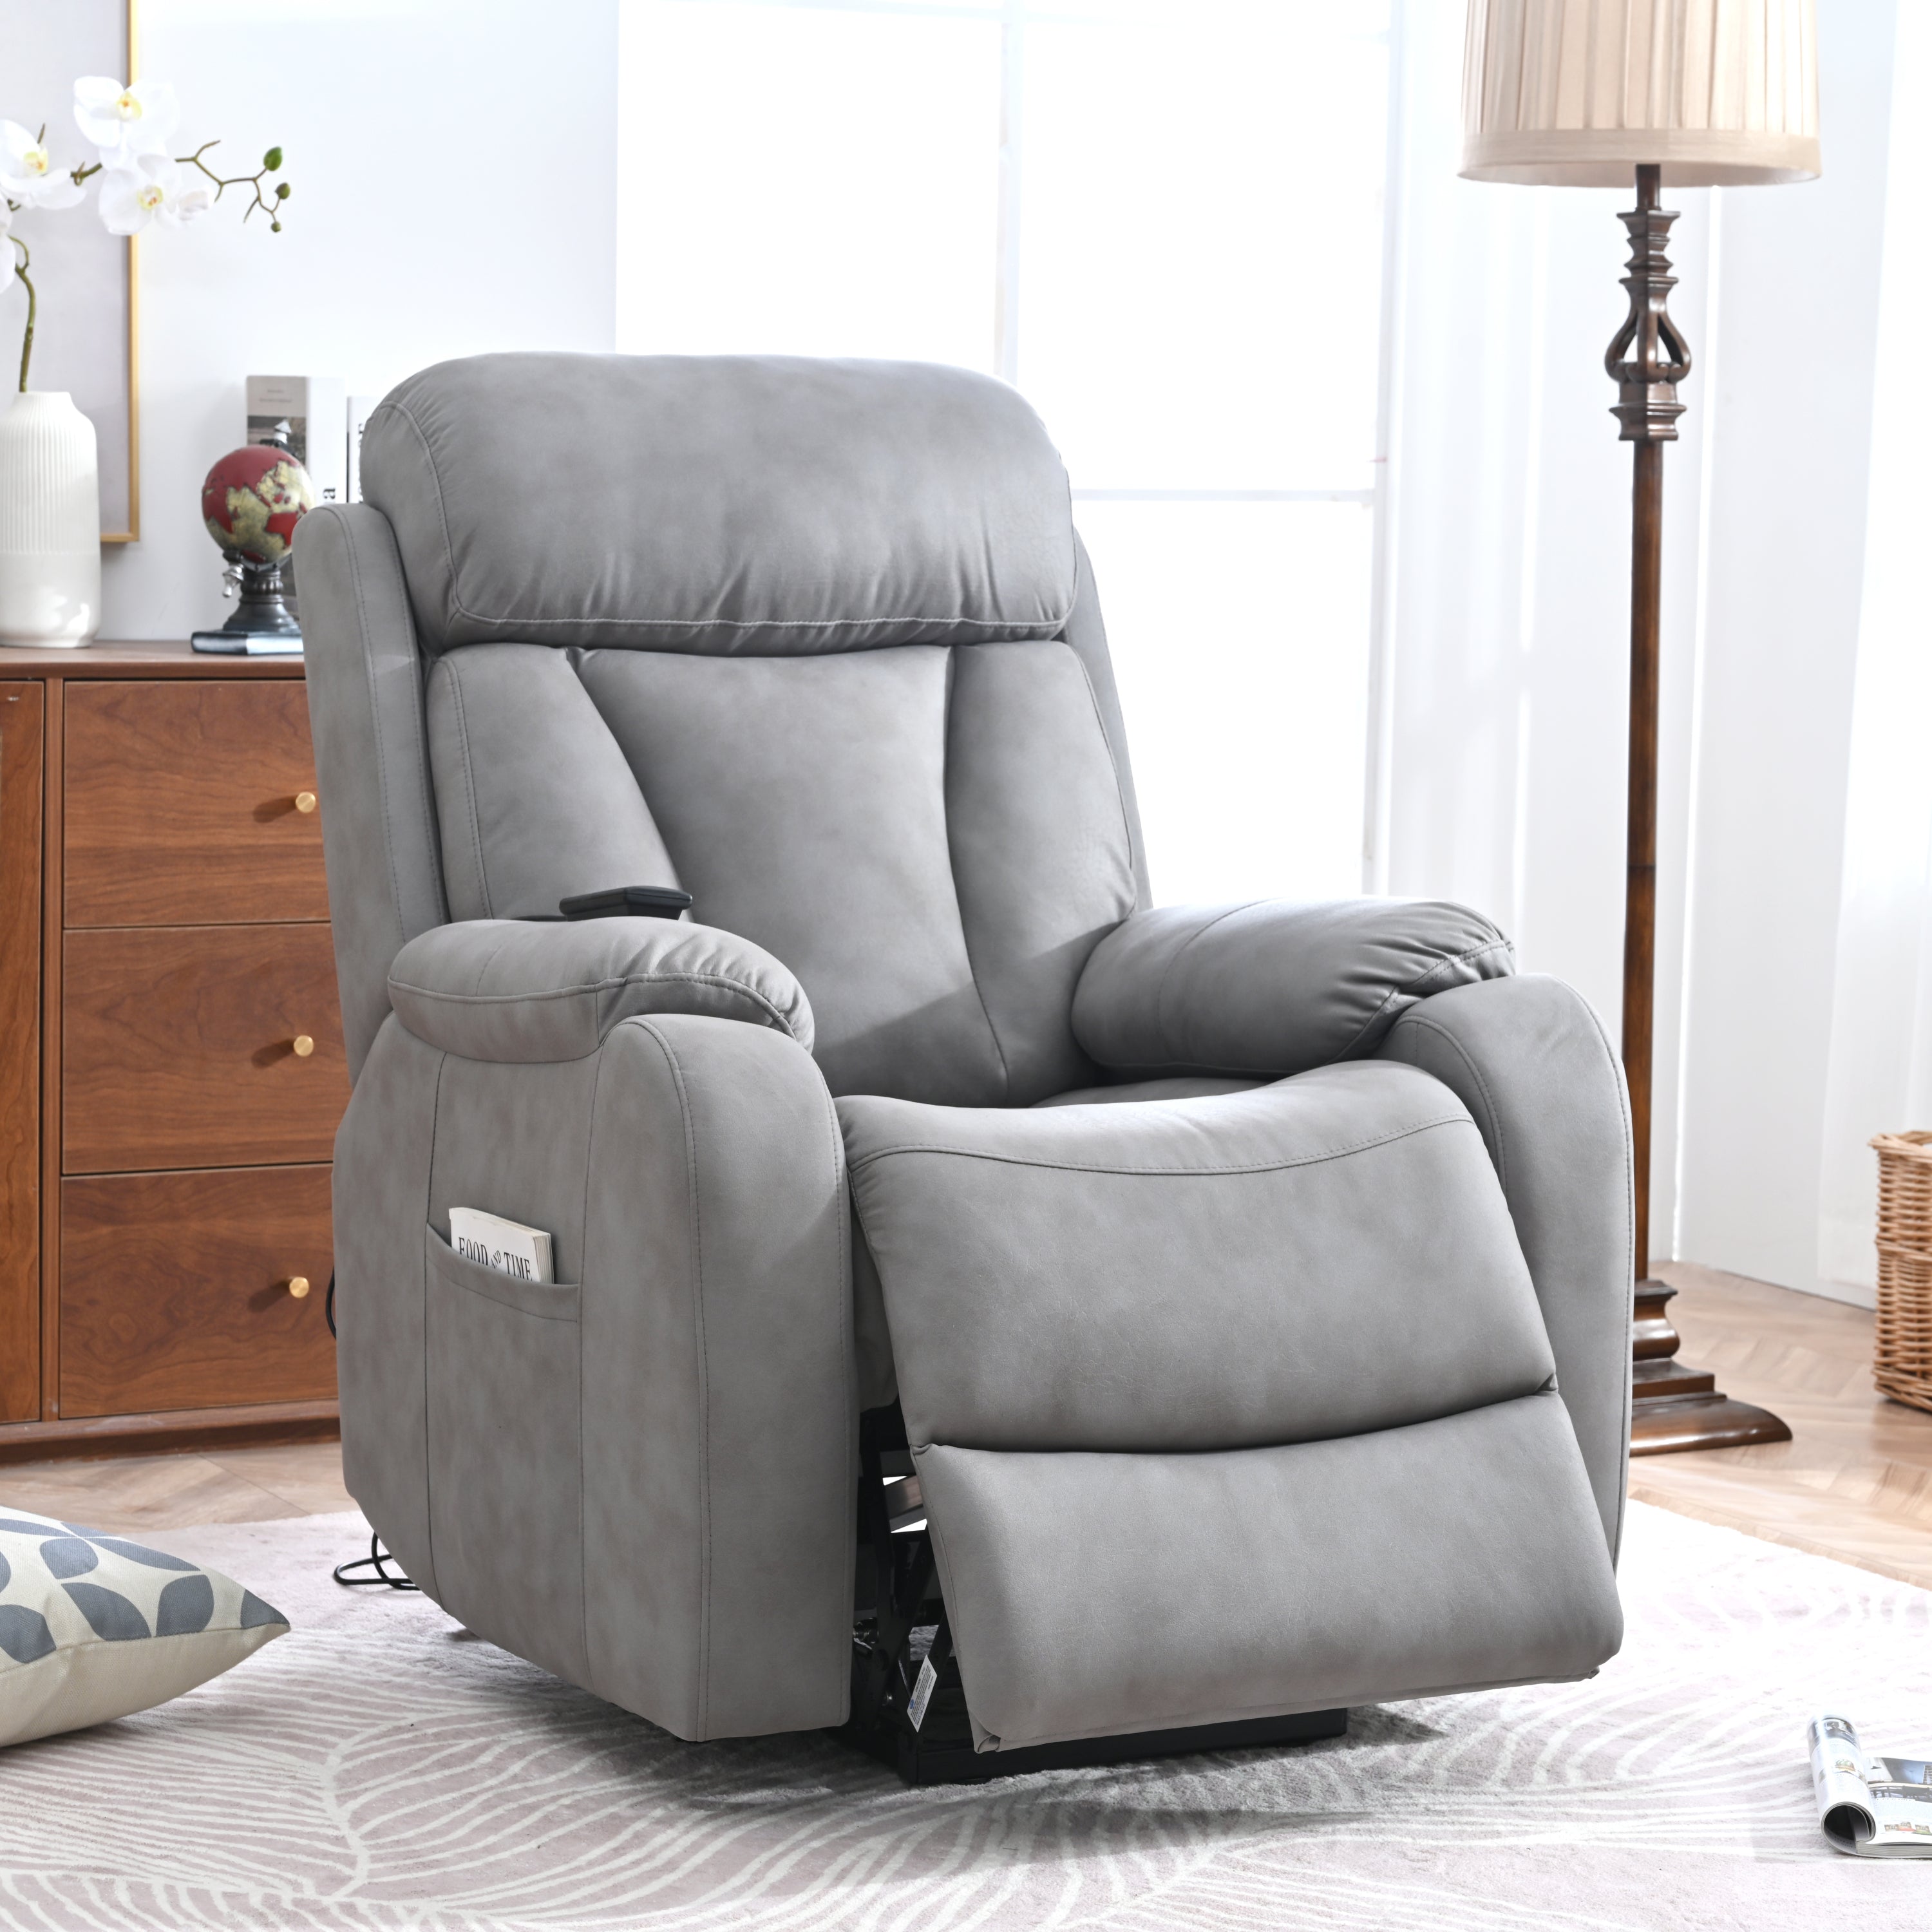 Light Gray Power Lift Chair Front Profile with Footrest Slightly Extended